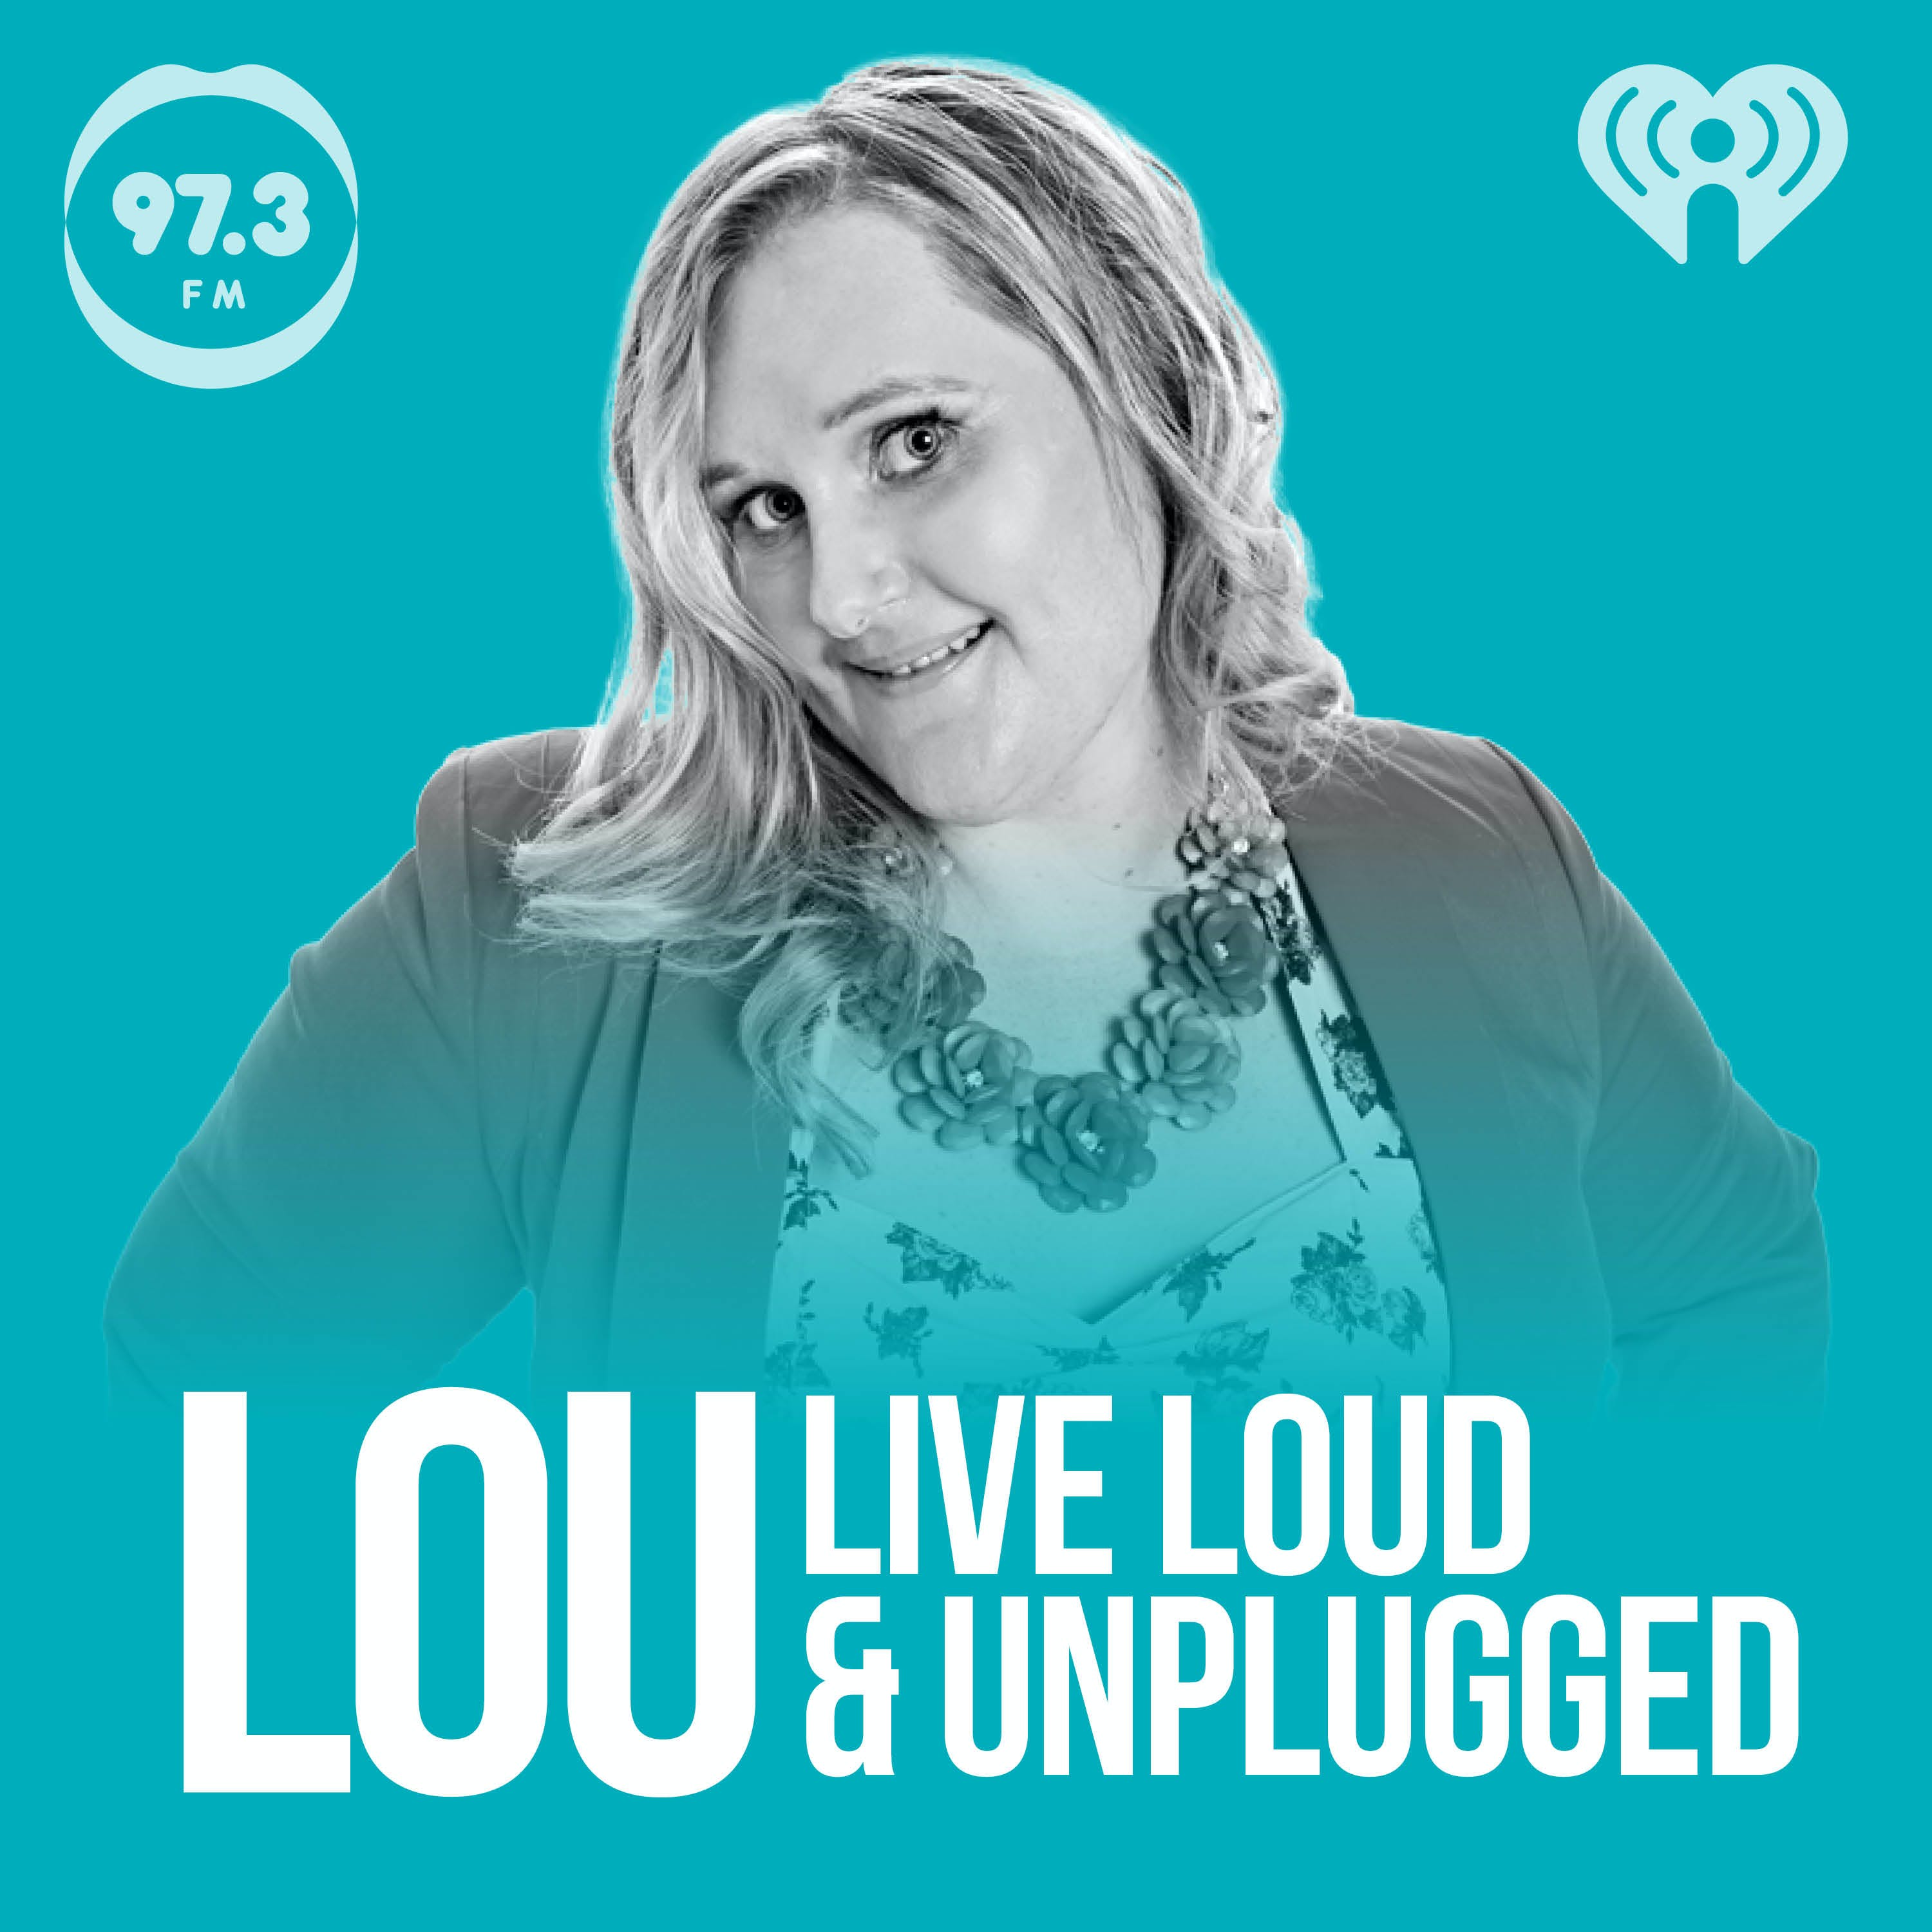 Lou: Live, Loud and Unplugged